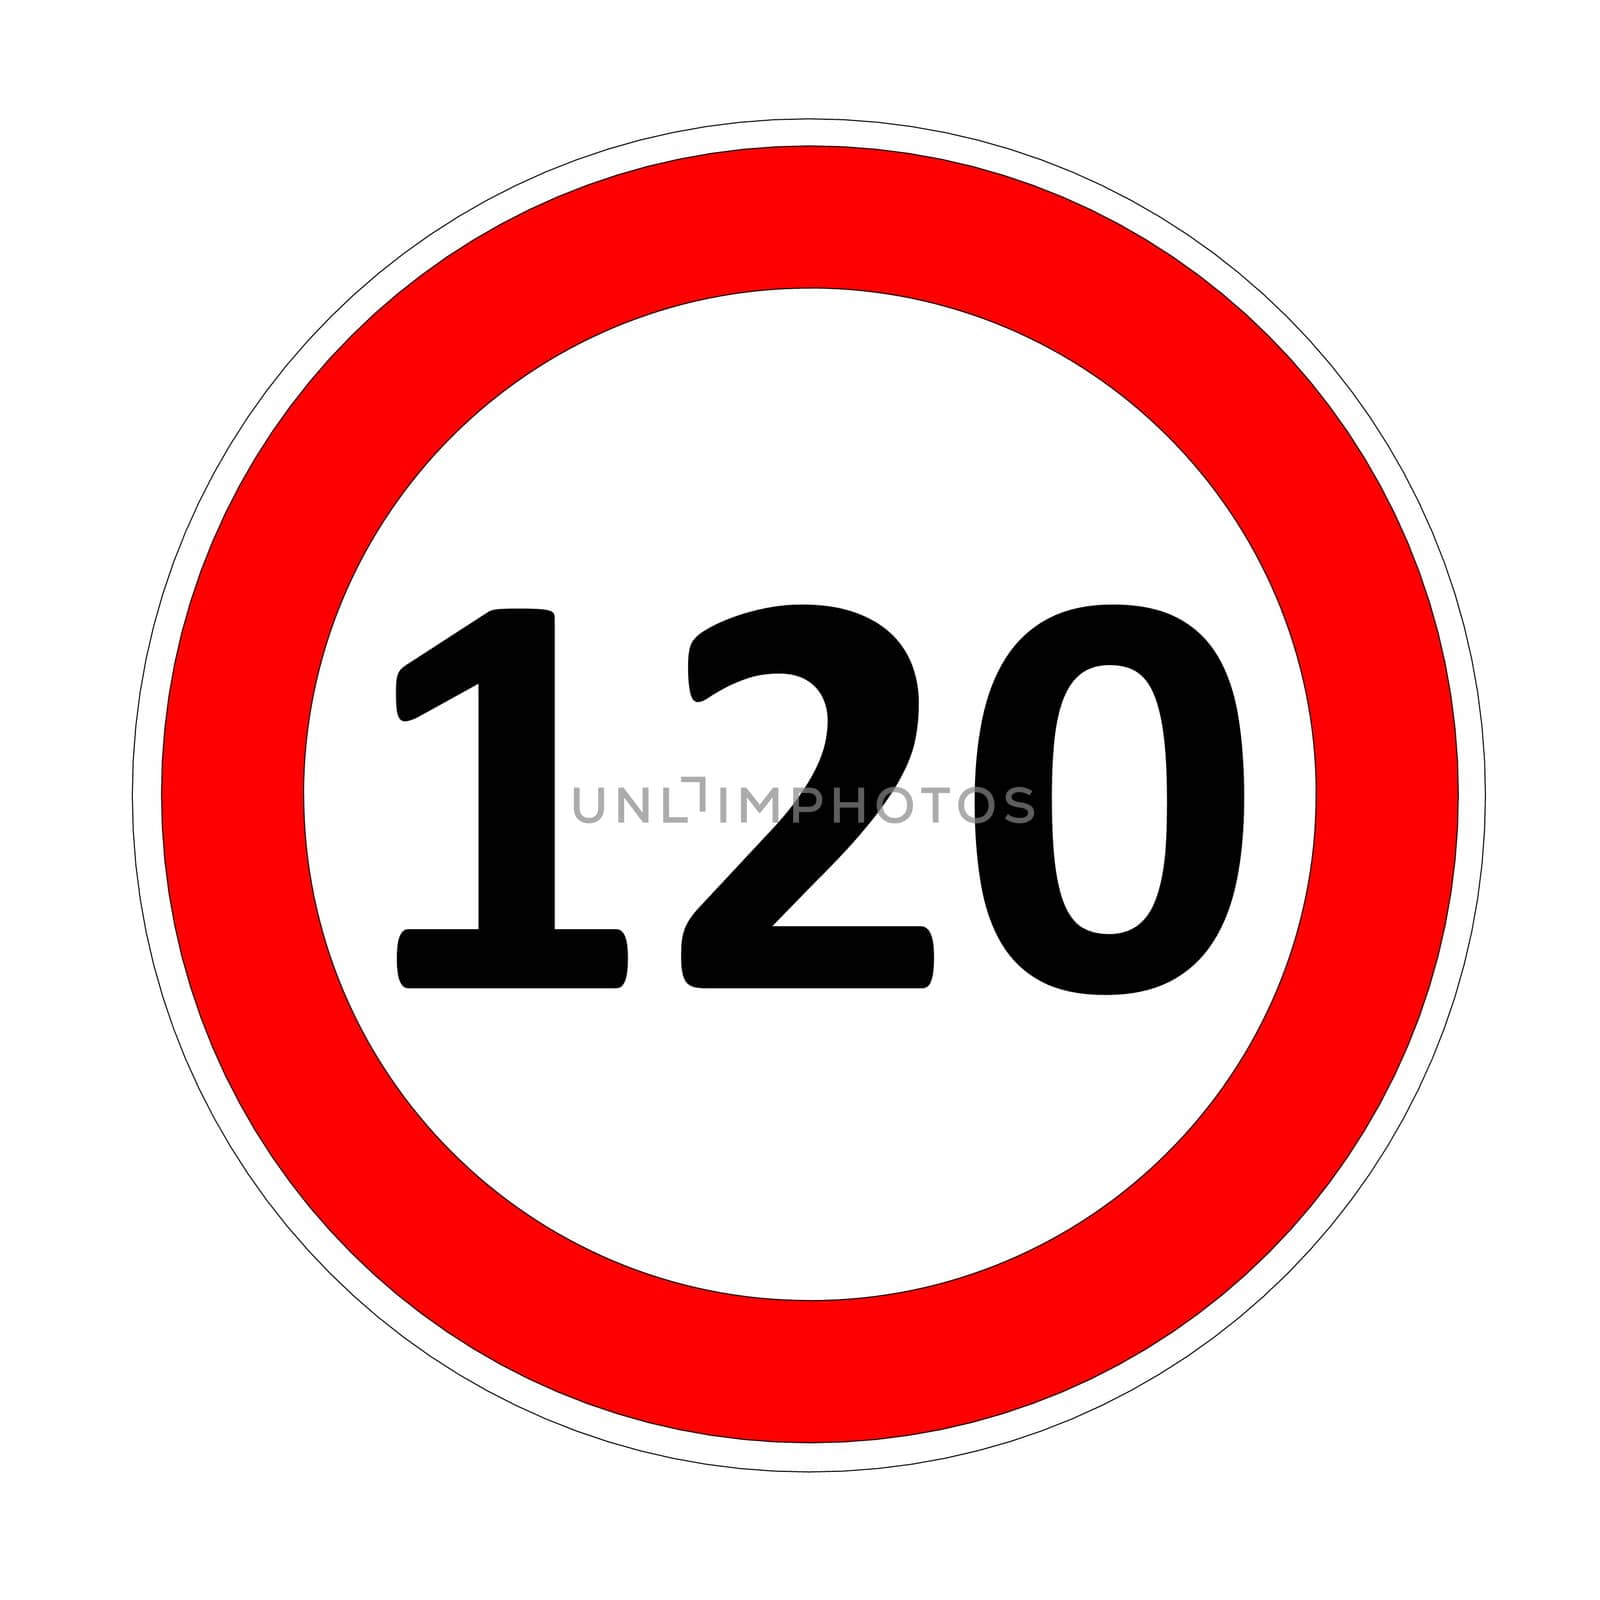 120 speed limitation road sign in white background